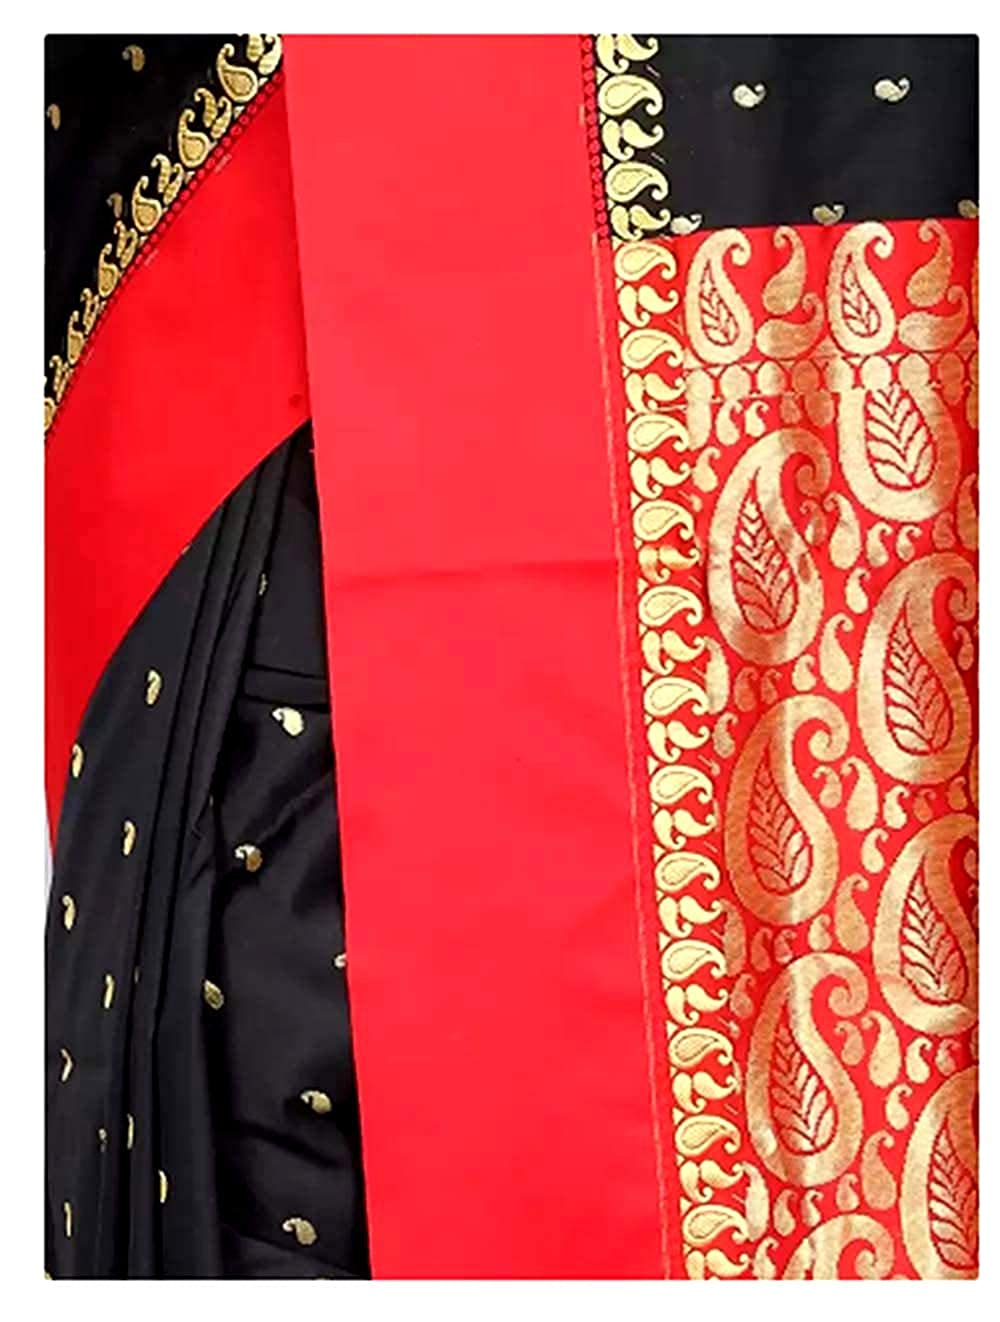 Women's Bengal Premium Garad Silk Saree with Blouse Piece (Black and Red)) - Brother-mart